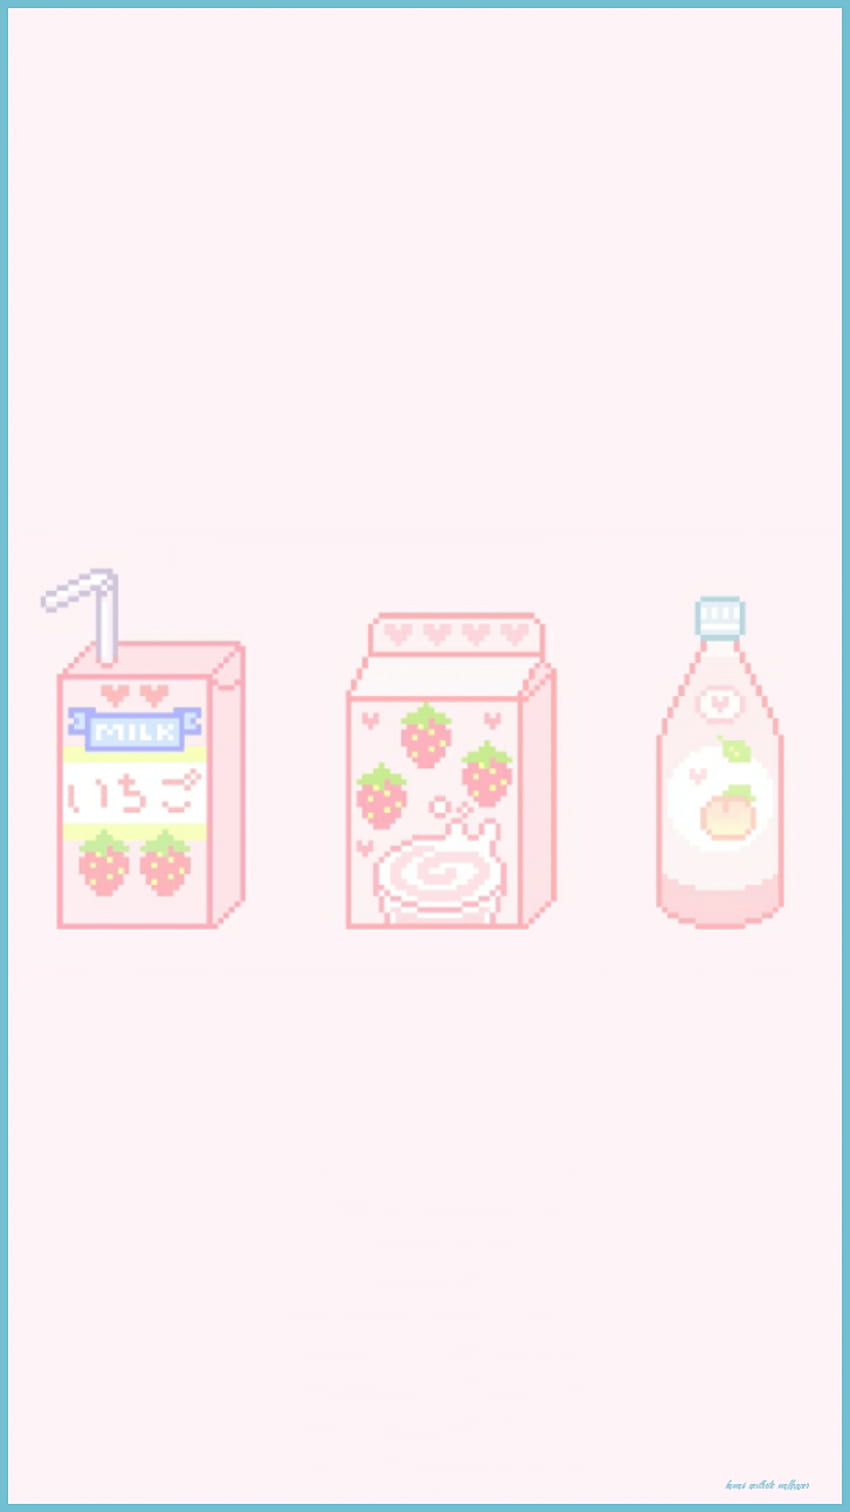 Kawaii Pastel Wallpaper APK for Android Download